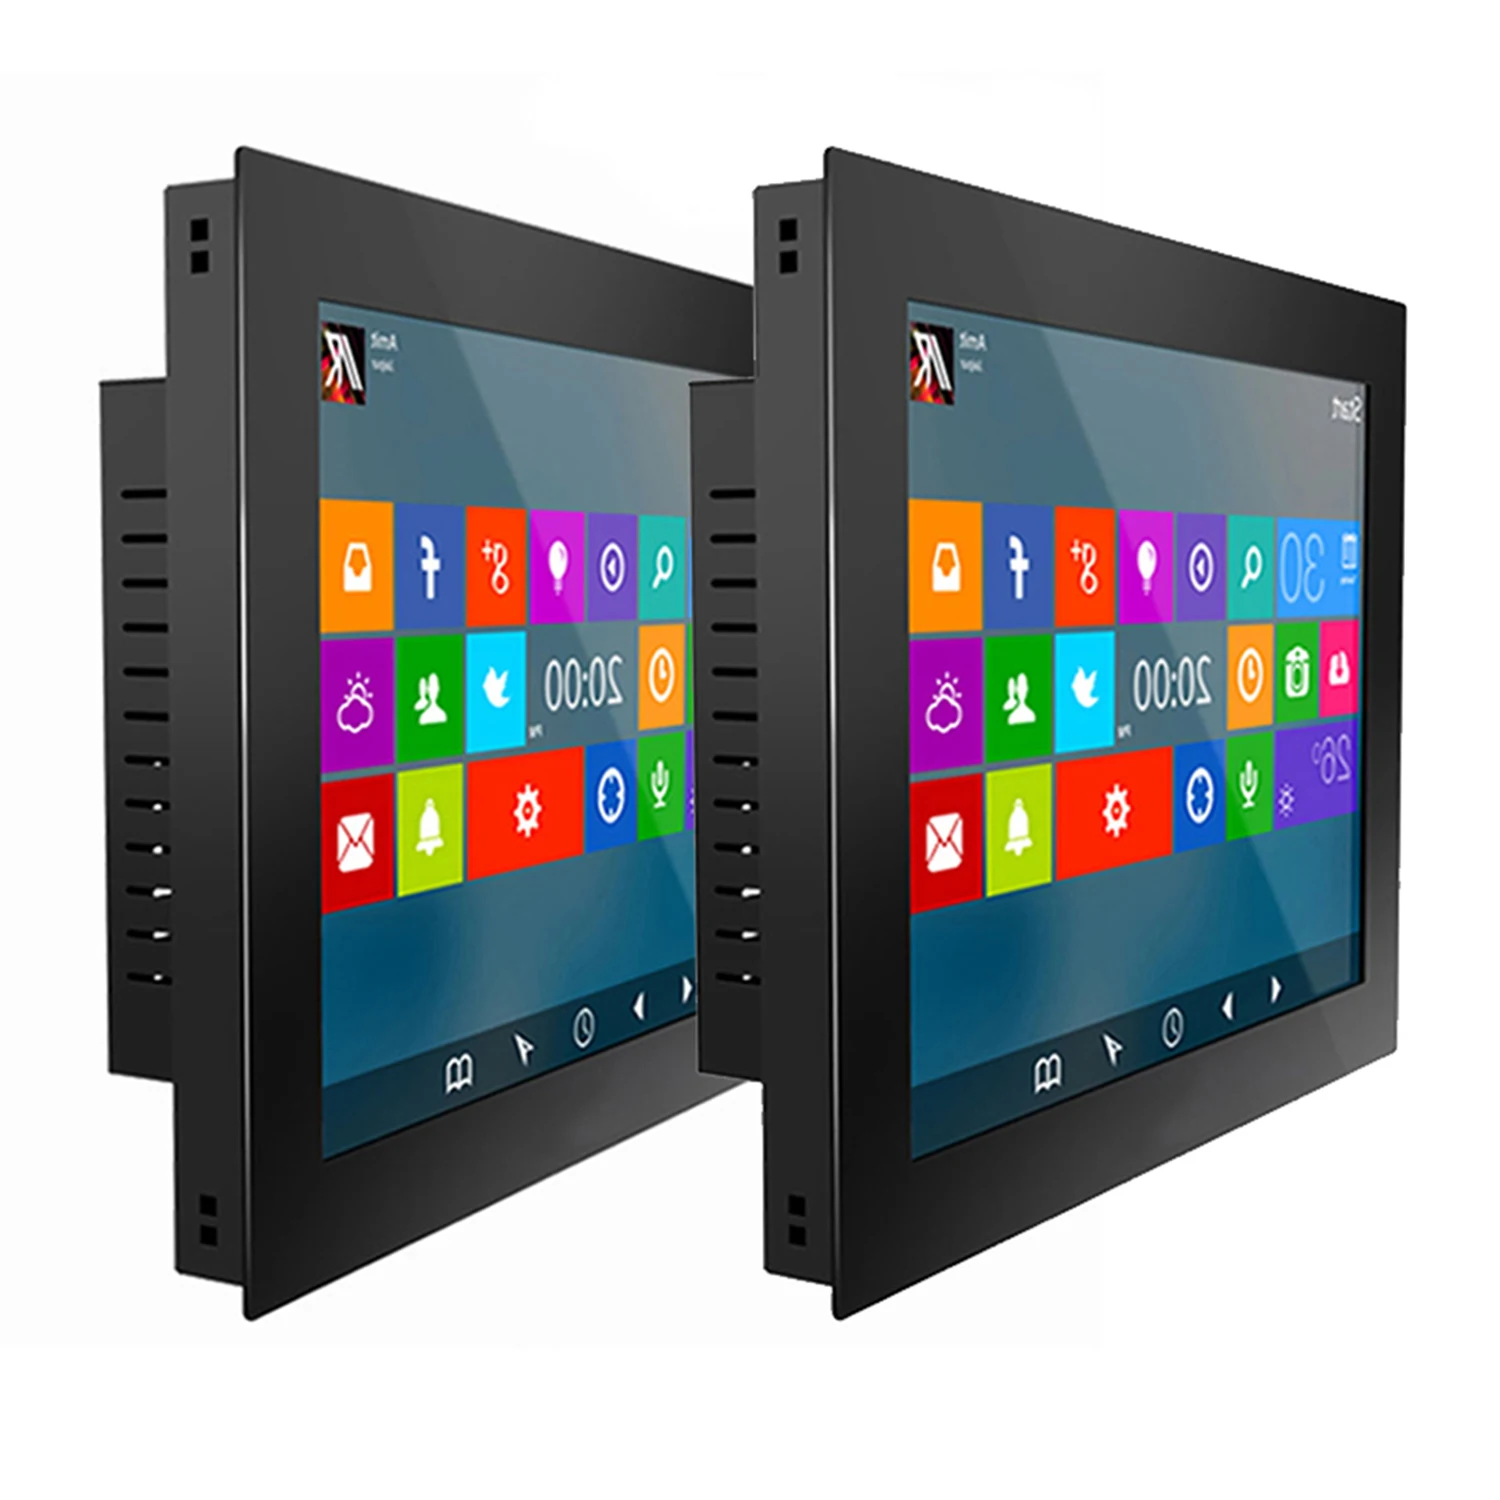 14 15.6 17.3 Inch Embedded Industrial Computer All-in-one Mini Tablet PC Intel Core i3 with Resistive Touch Screen for Win10 Pro